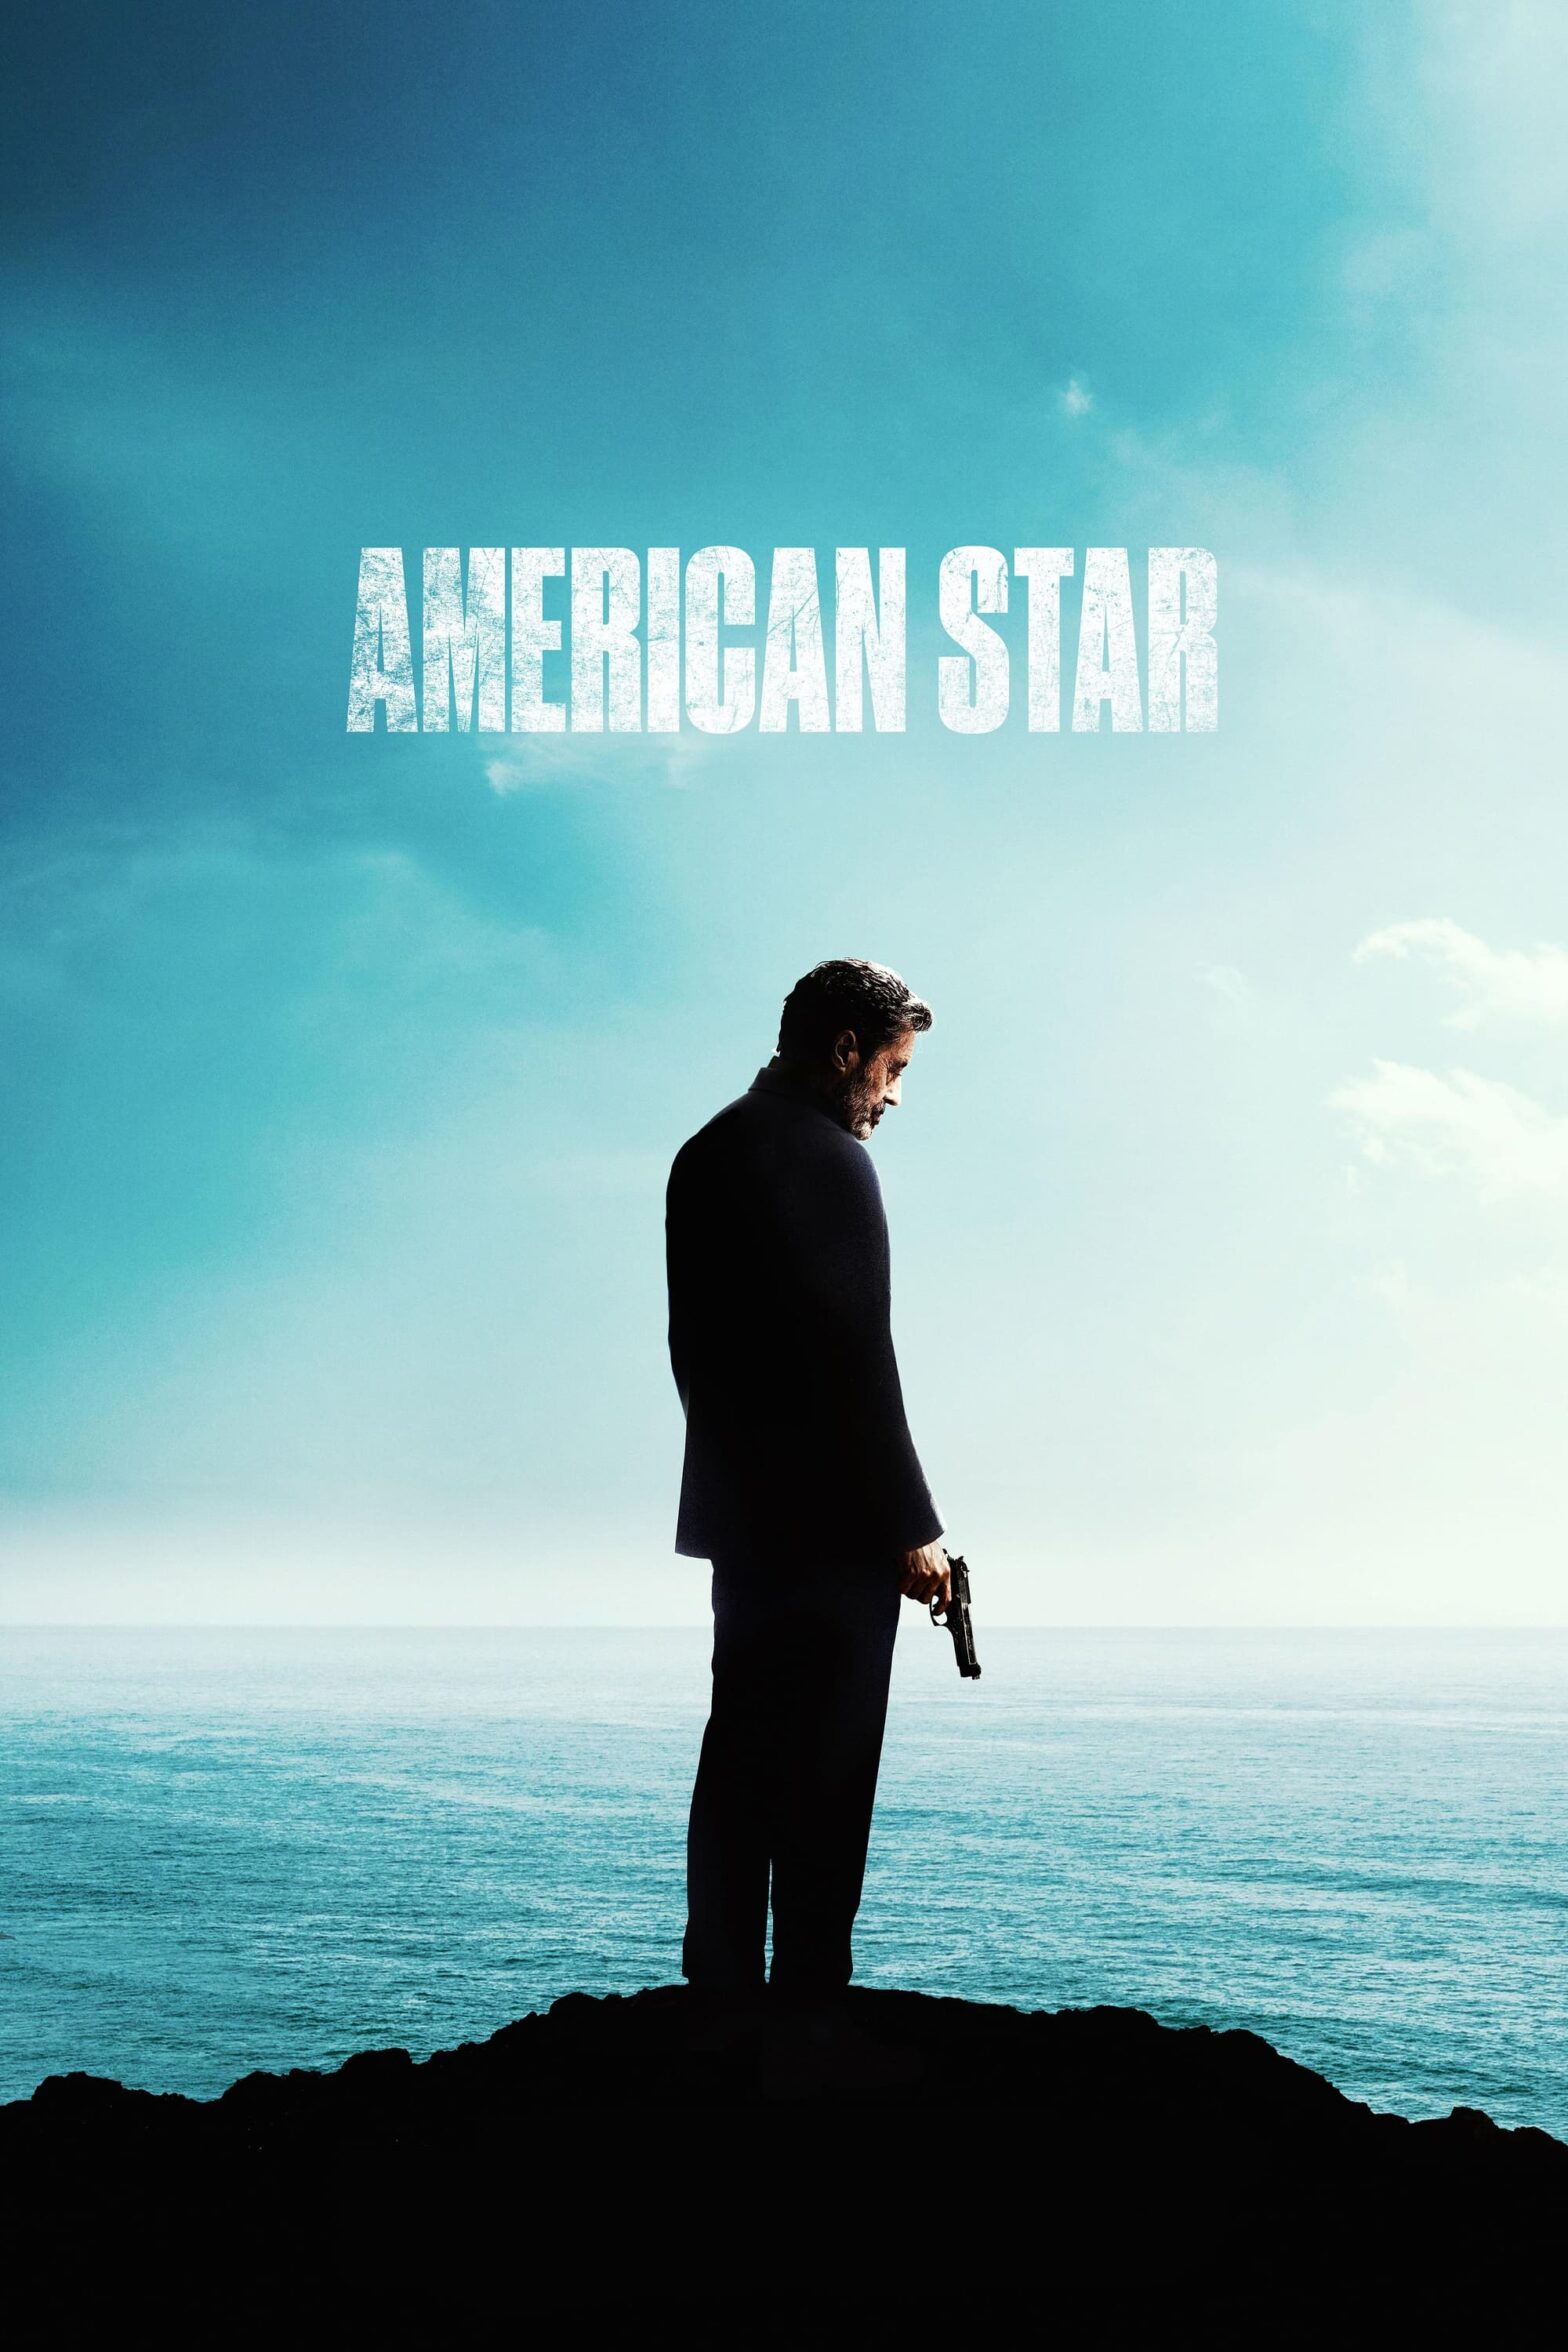 Poster for the movie "American Star"